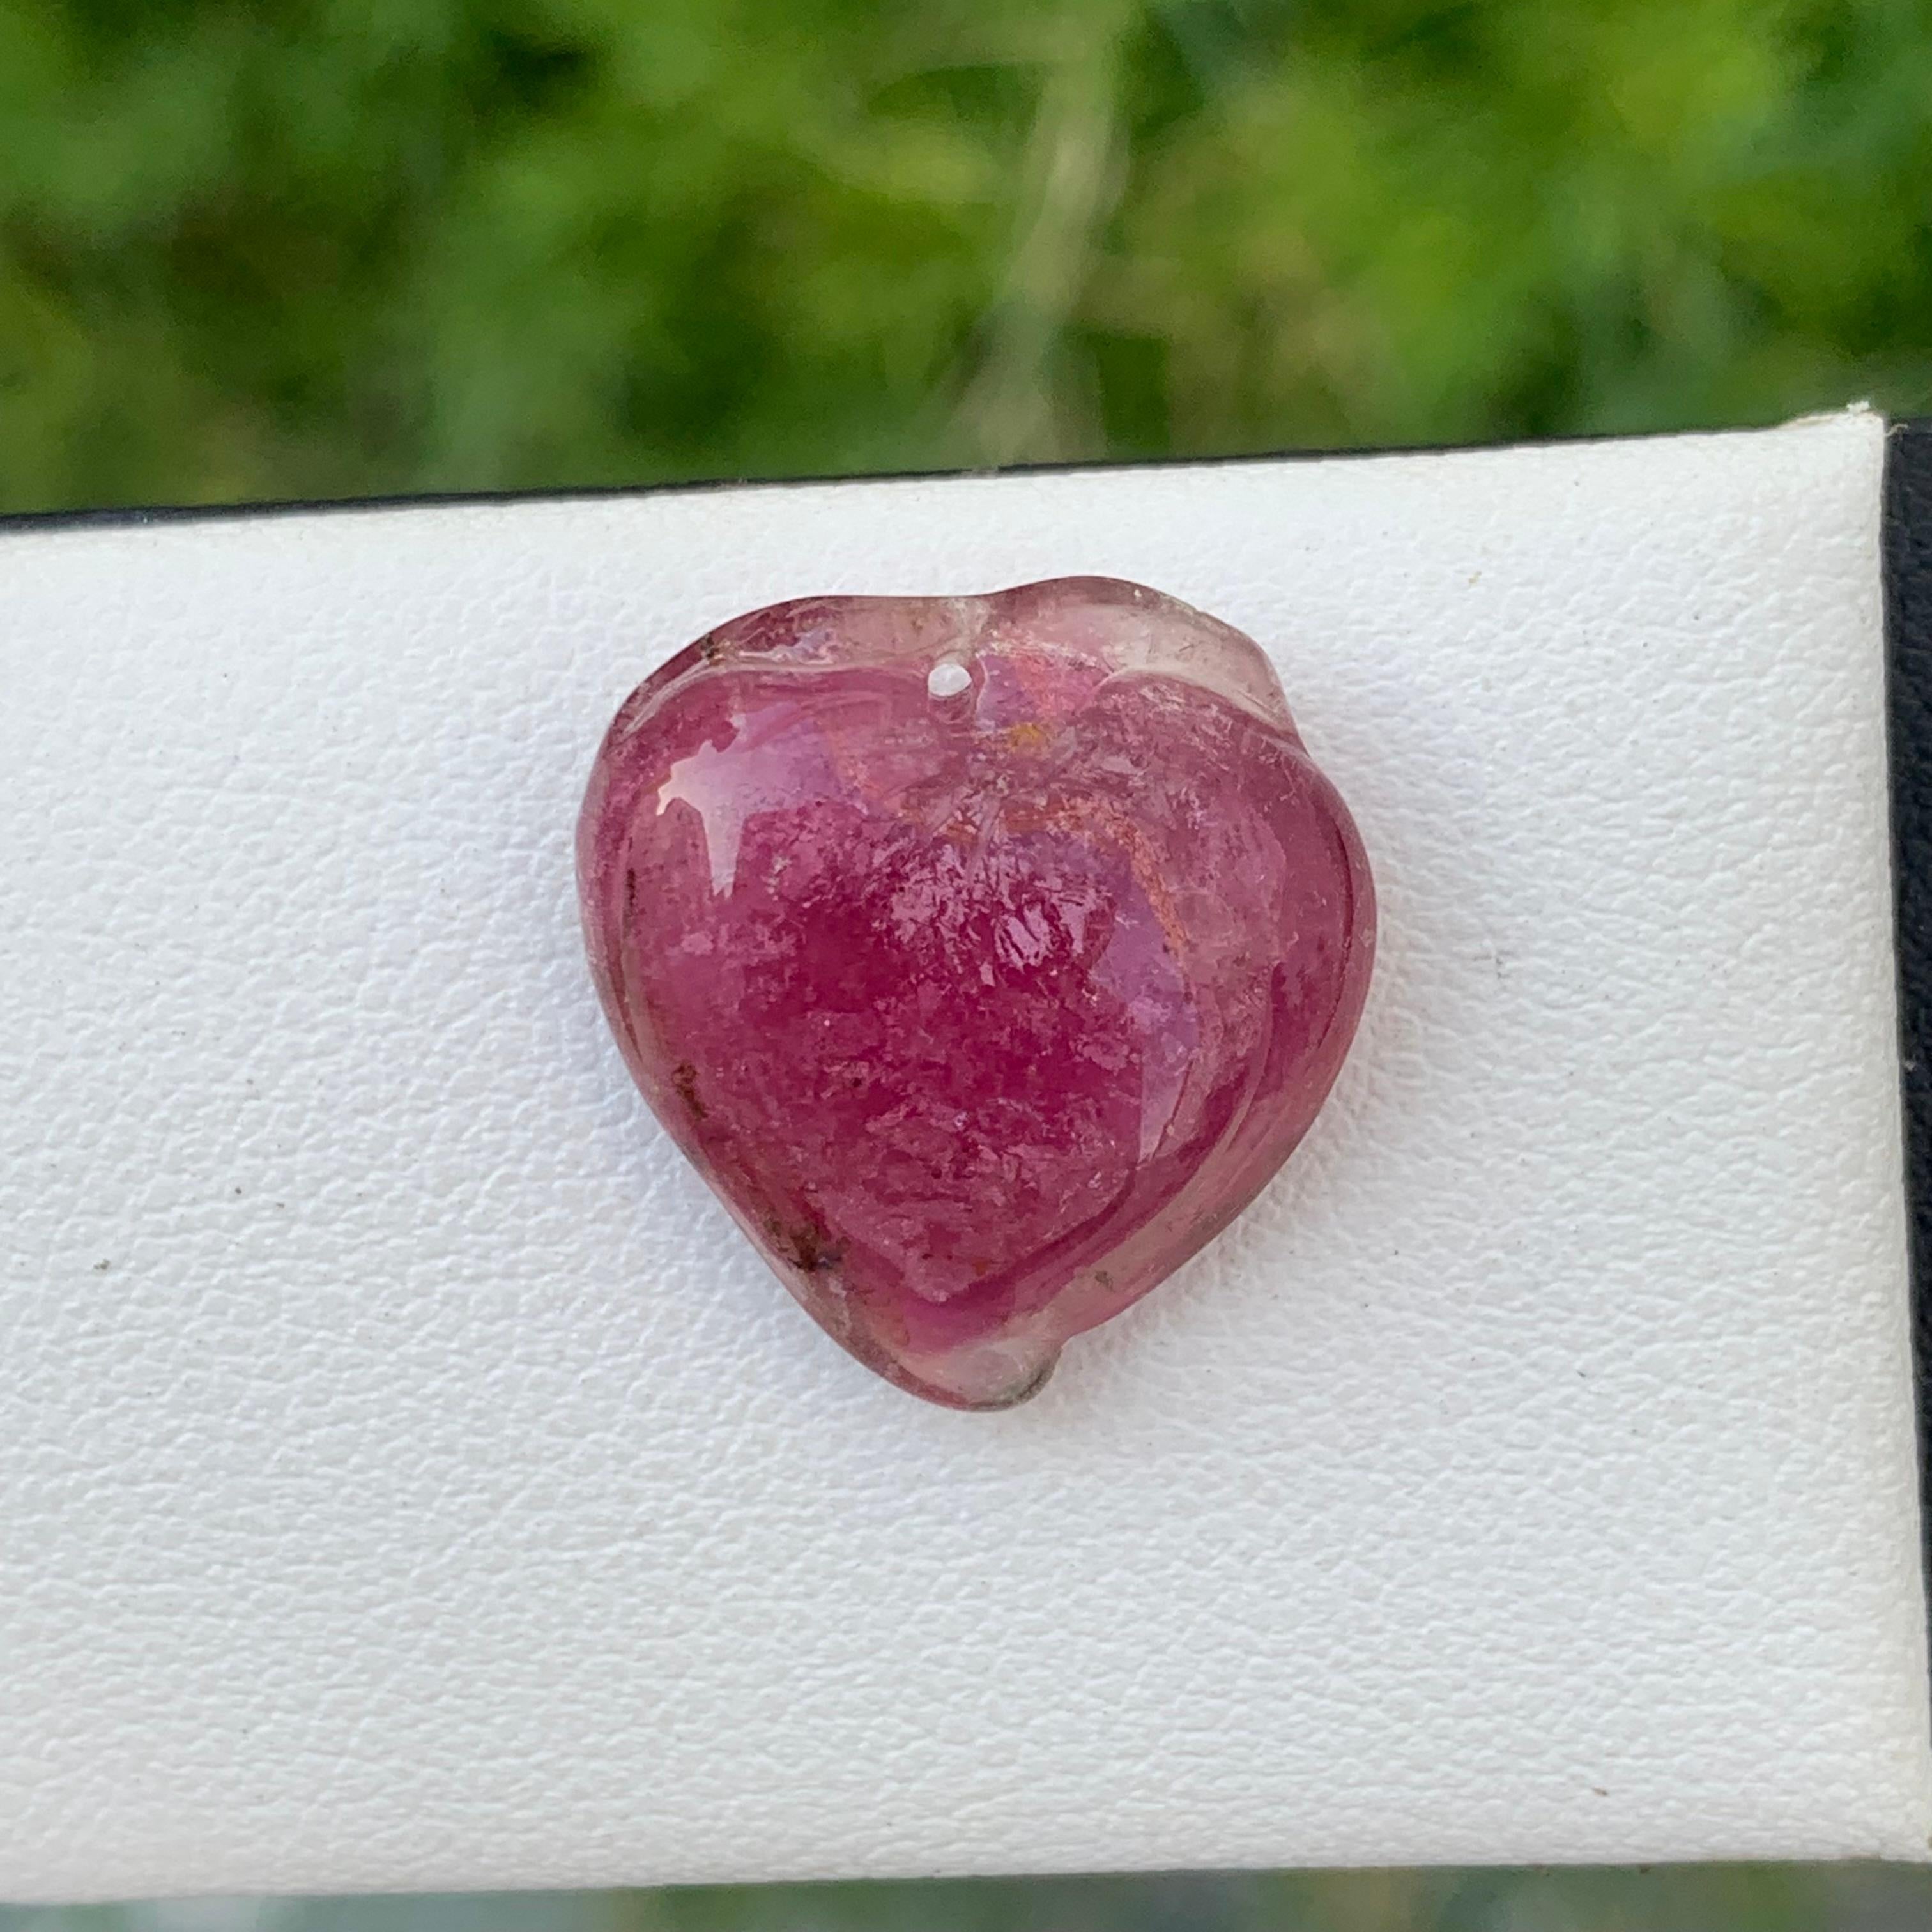 Adam Style 14.65 Carat Loose Heart Shape Tourmaline Drilled Carving from Africa For Sale